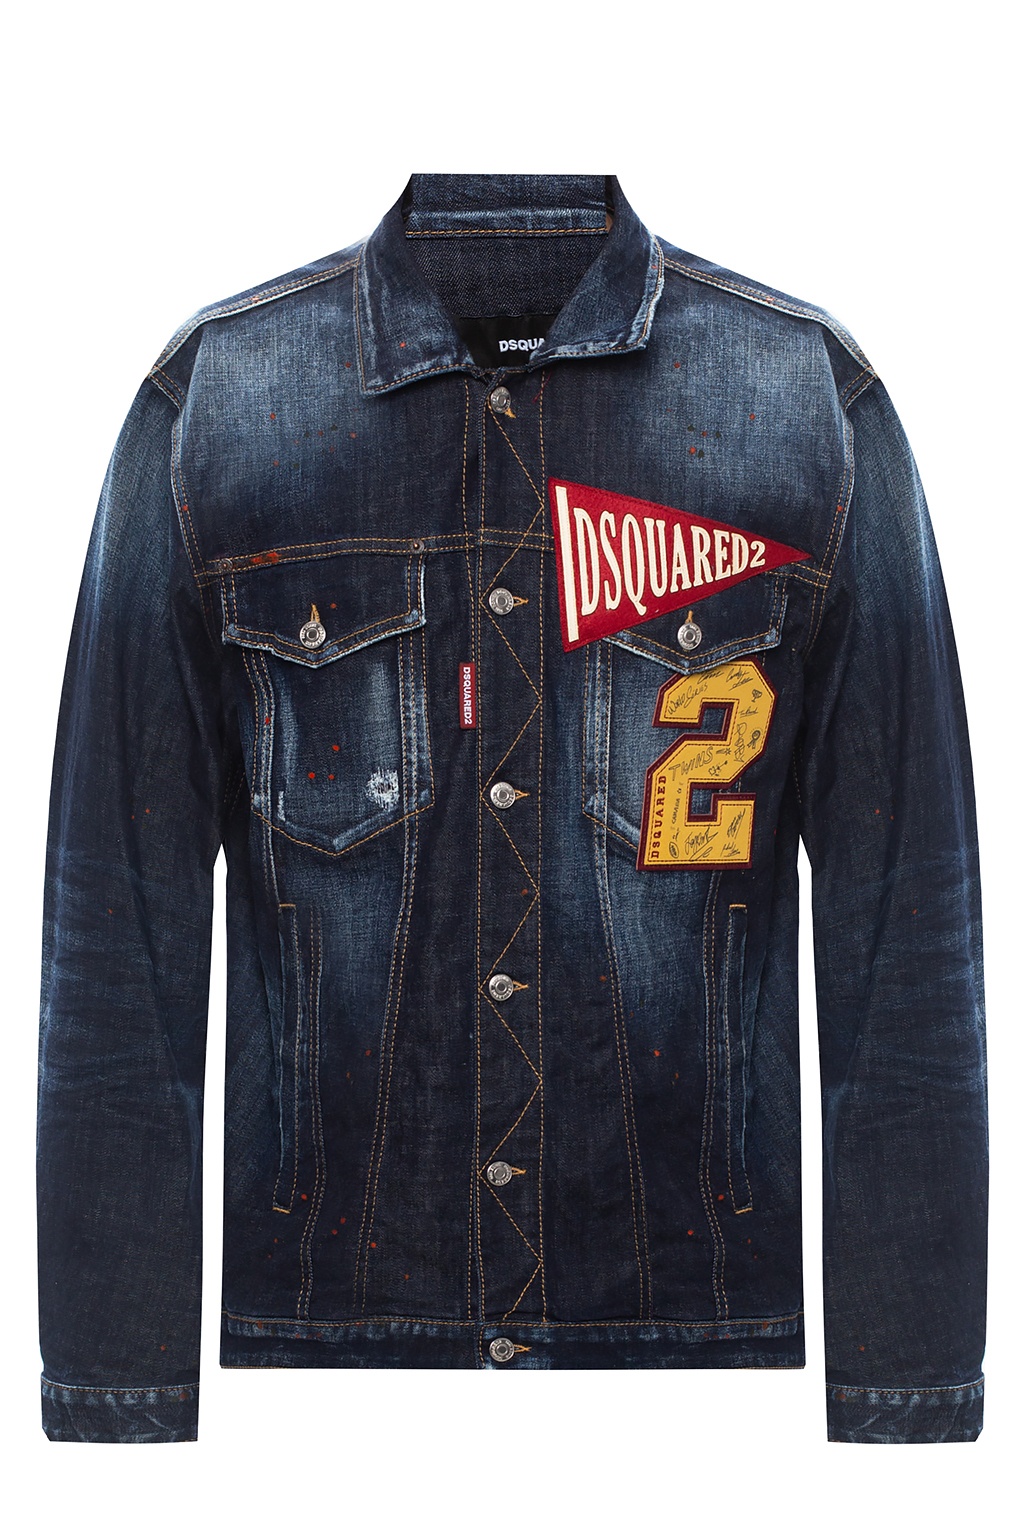 dsquared patched jacket